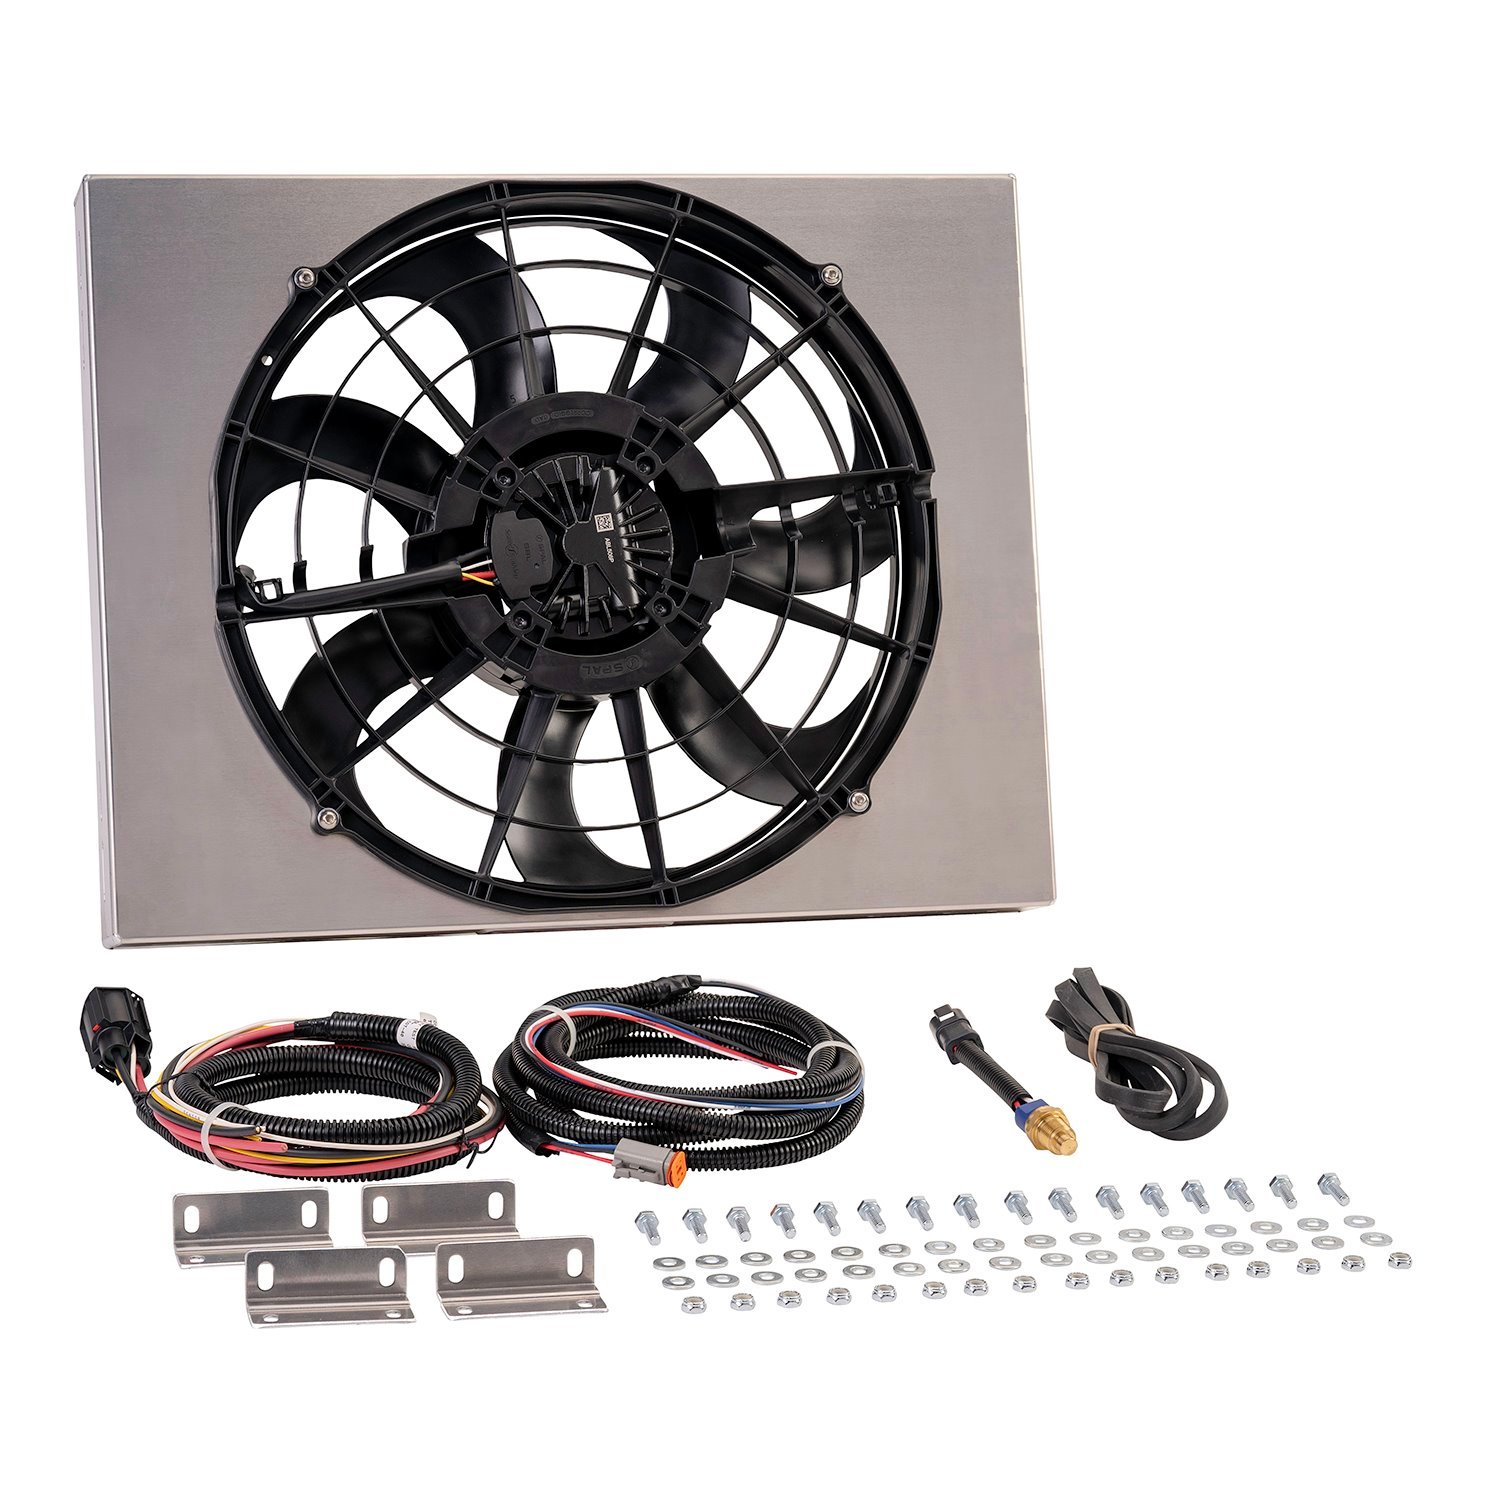 67923-195 Brushless Single Powerpack 17 in. Radiator Fan Assembly with Integrated 195 Degree PWM Controller